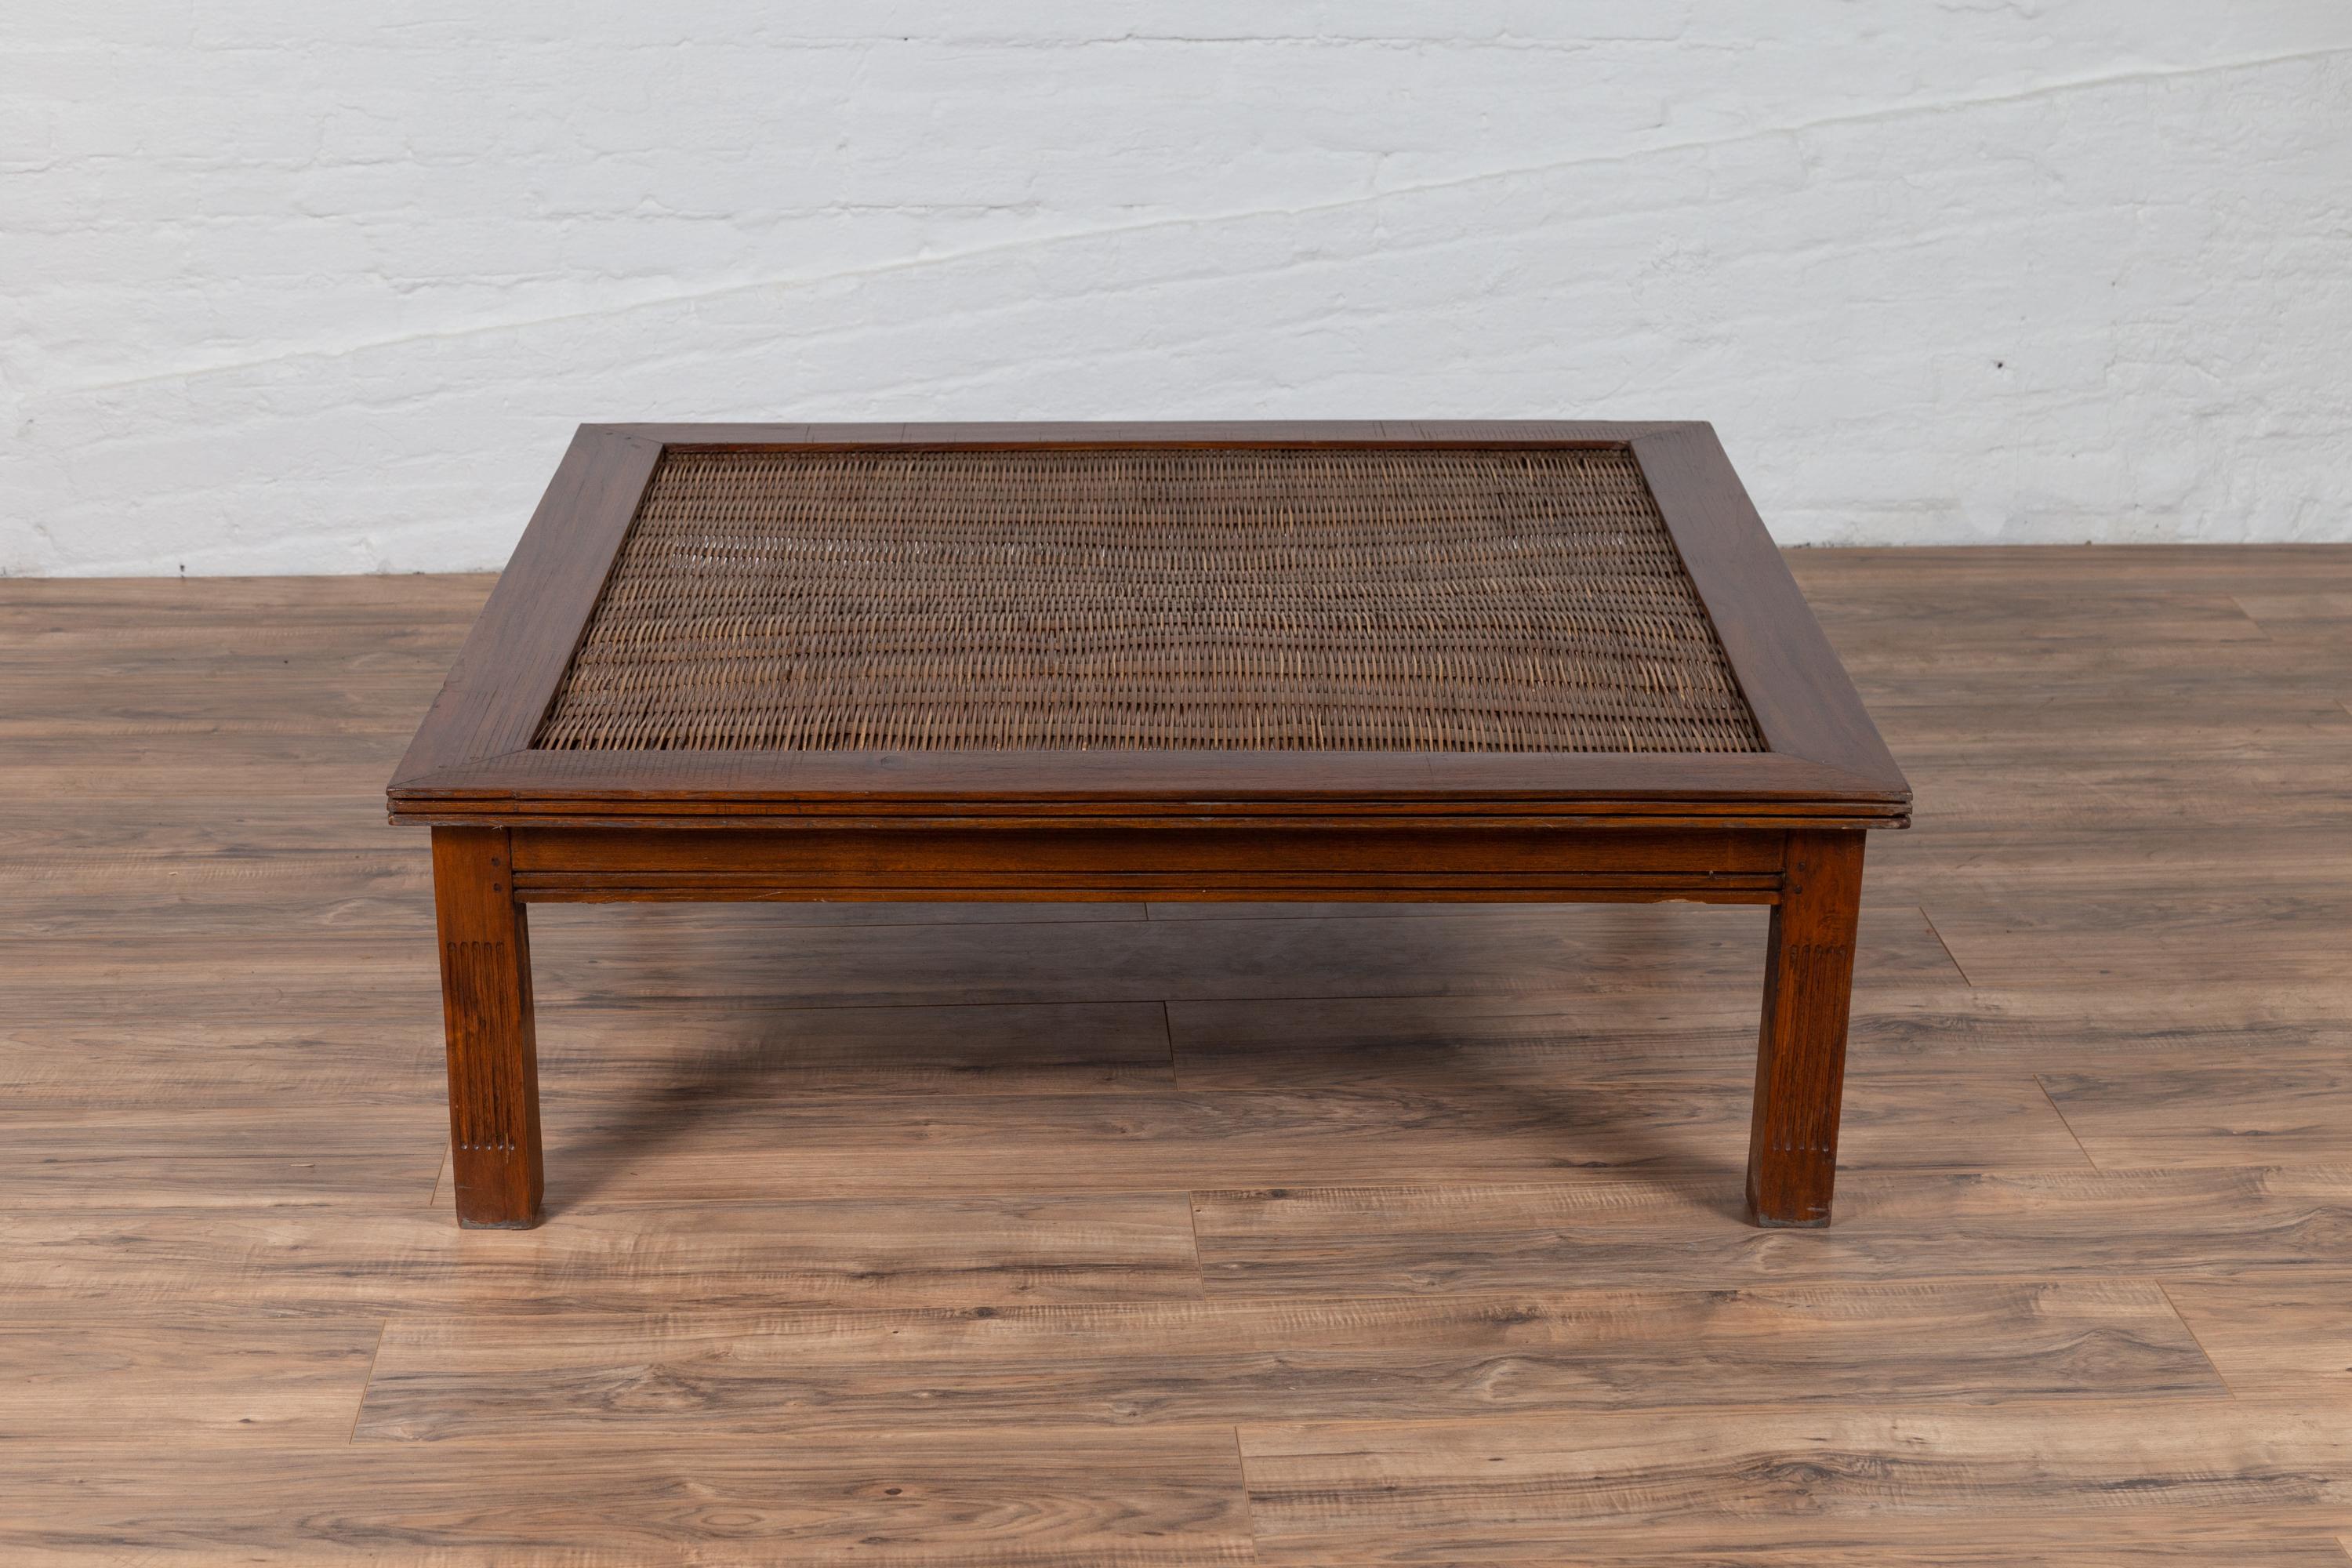 Antique Chinese Square-Shaped Elm Coffee Table with Rattan Inset and Fluted Legs 2